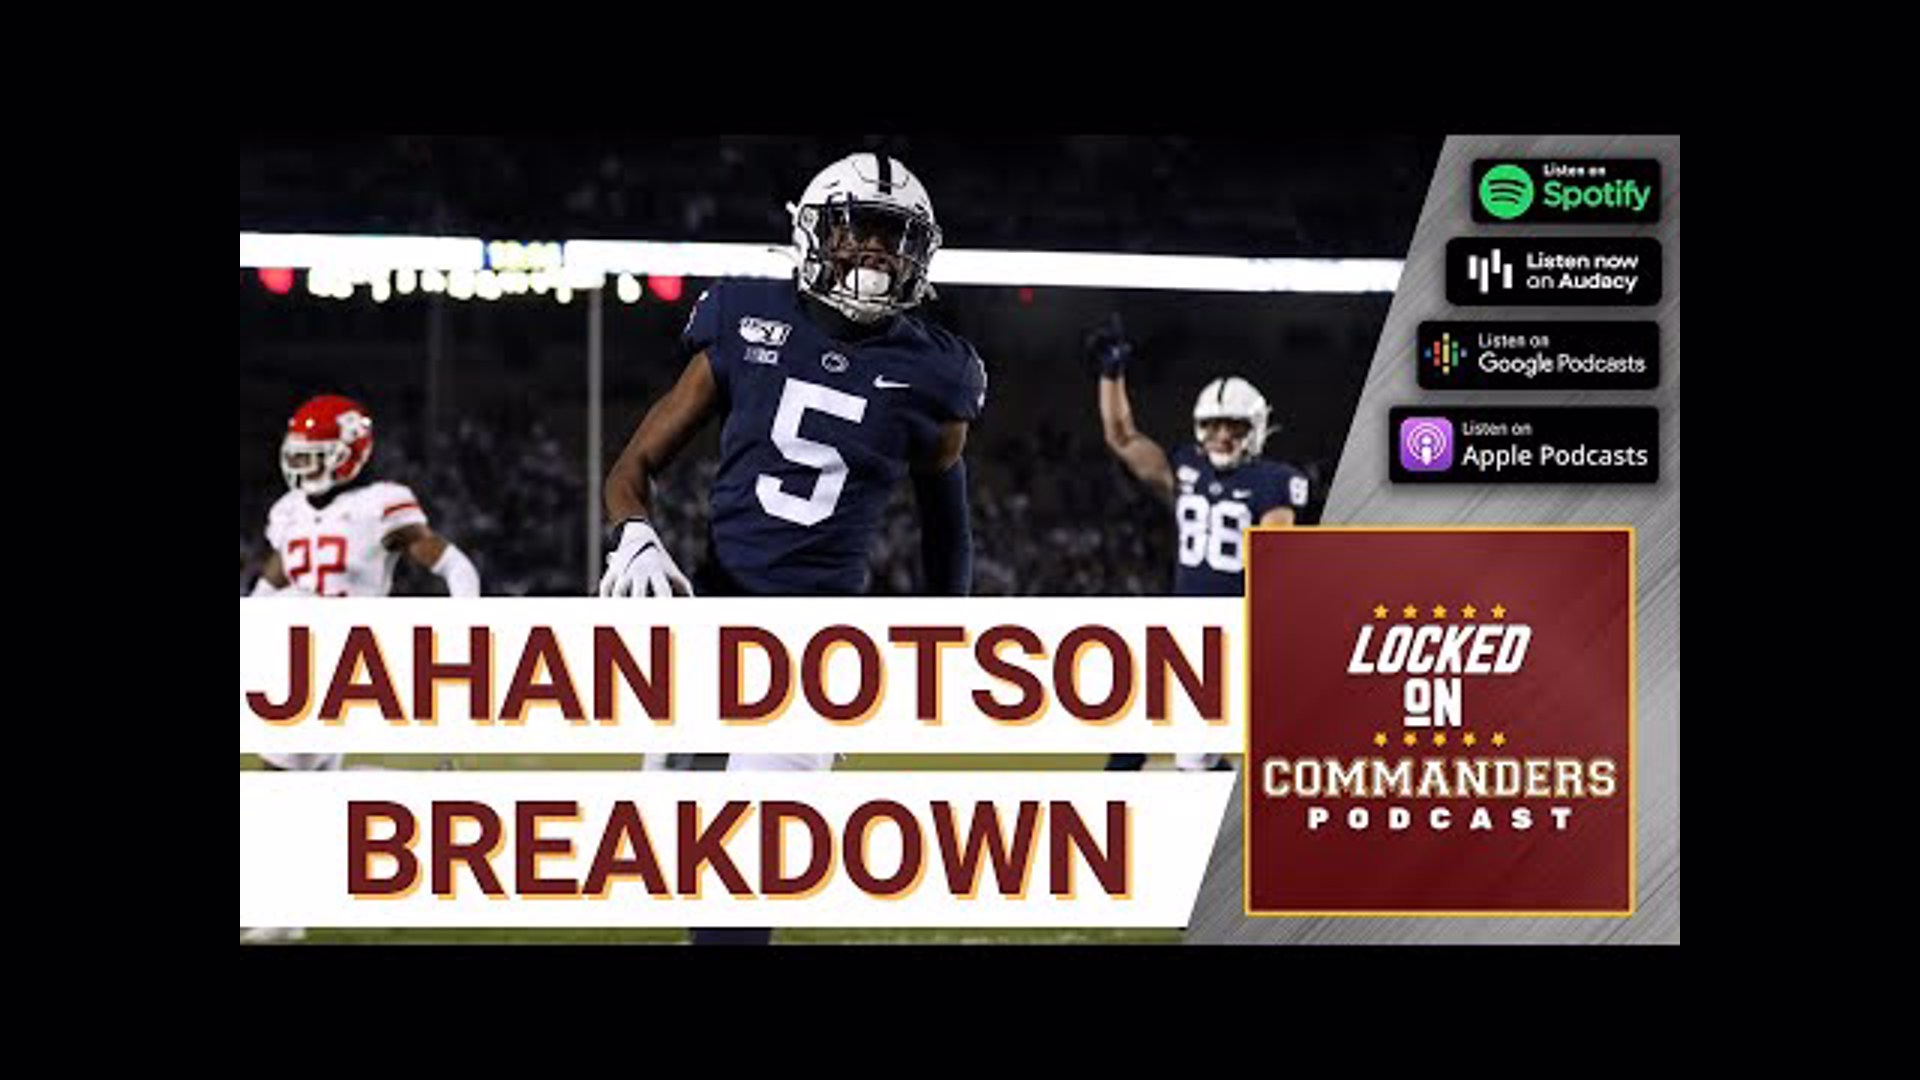 NFL Draft: What are the Commanders getting in Jahan Dotson?